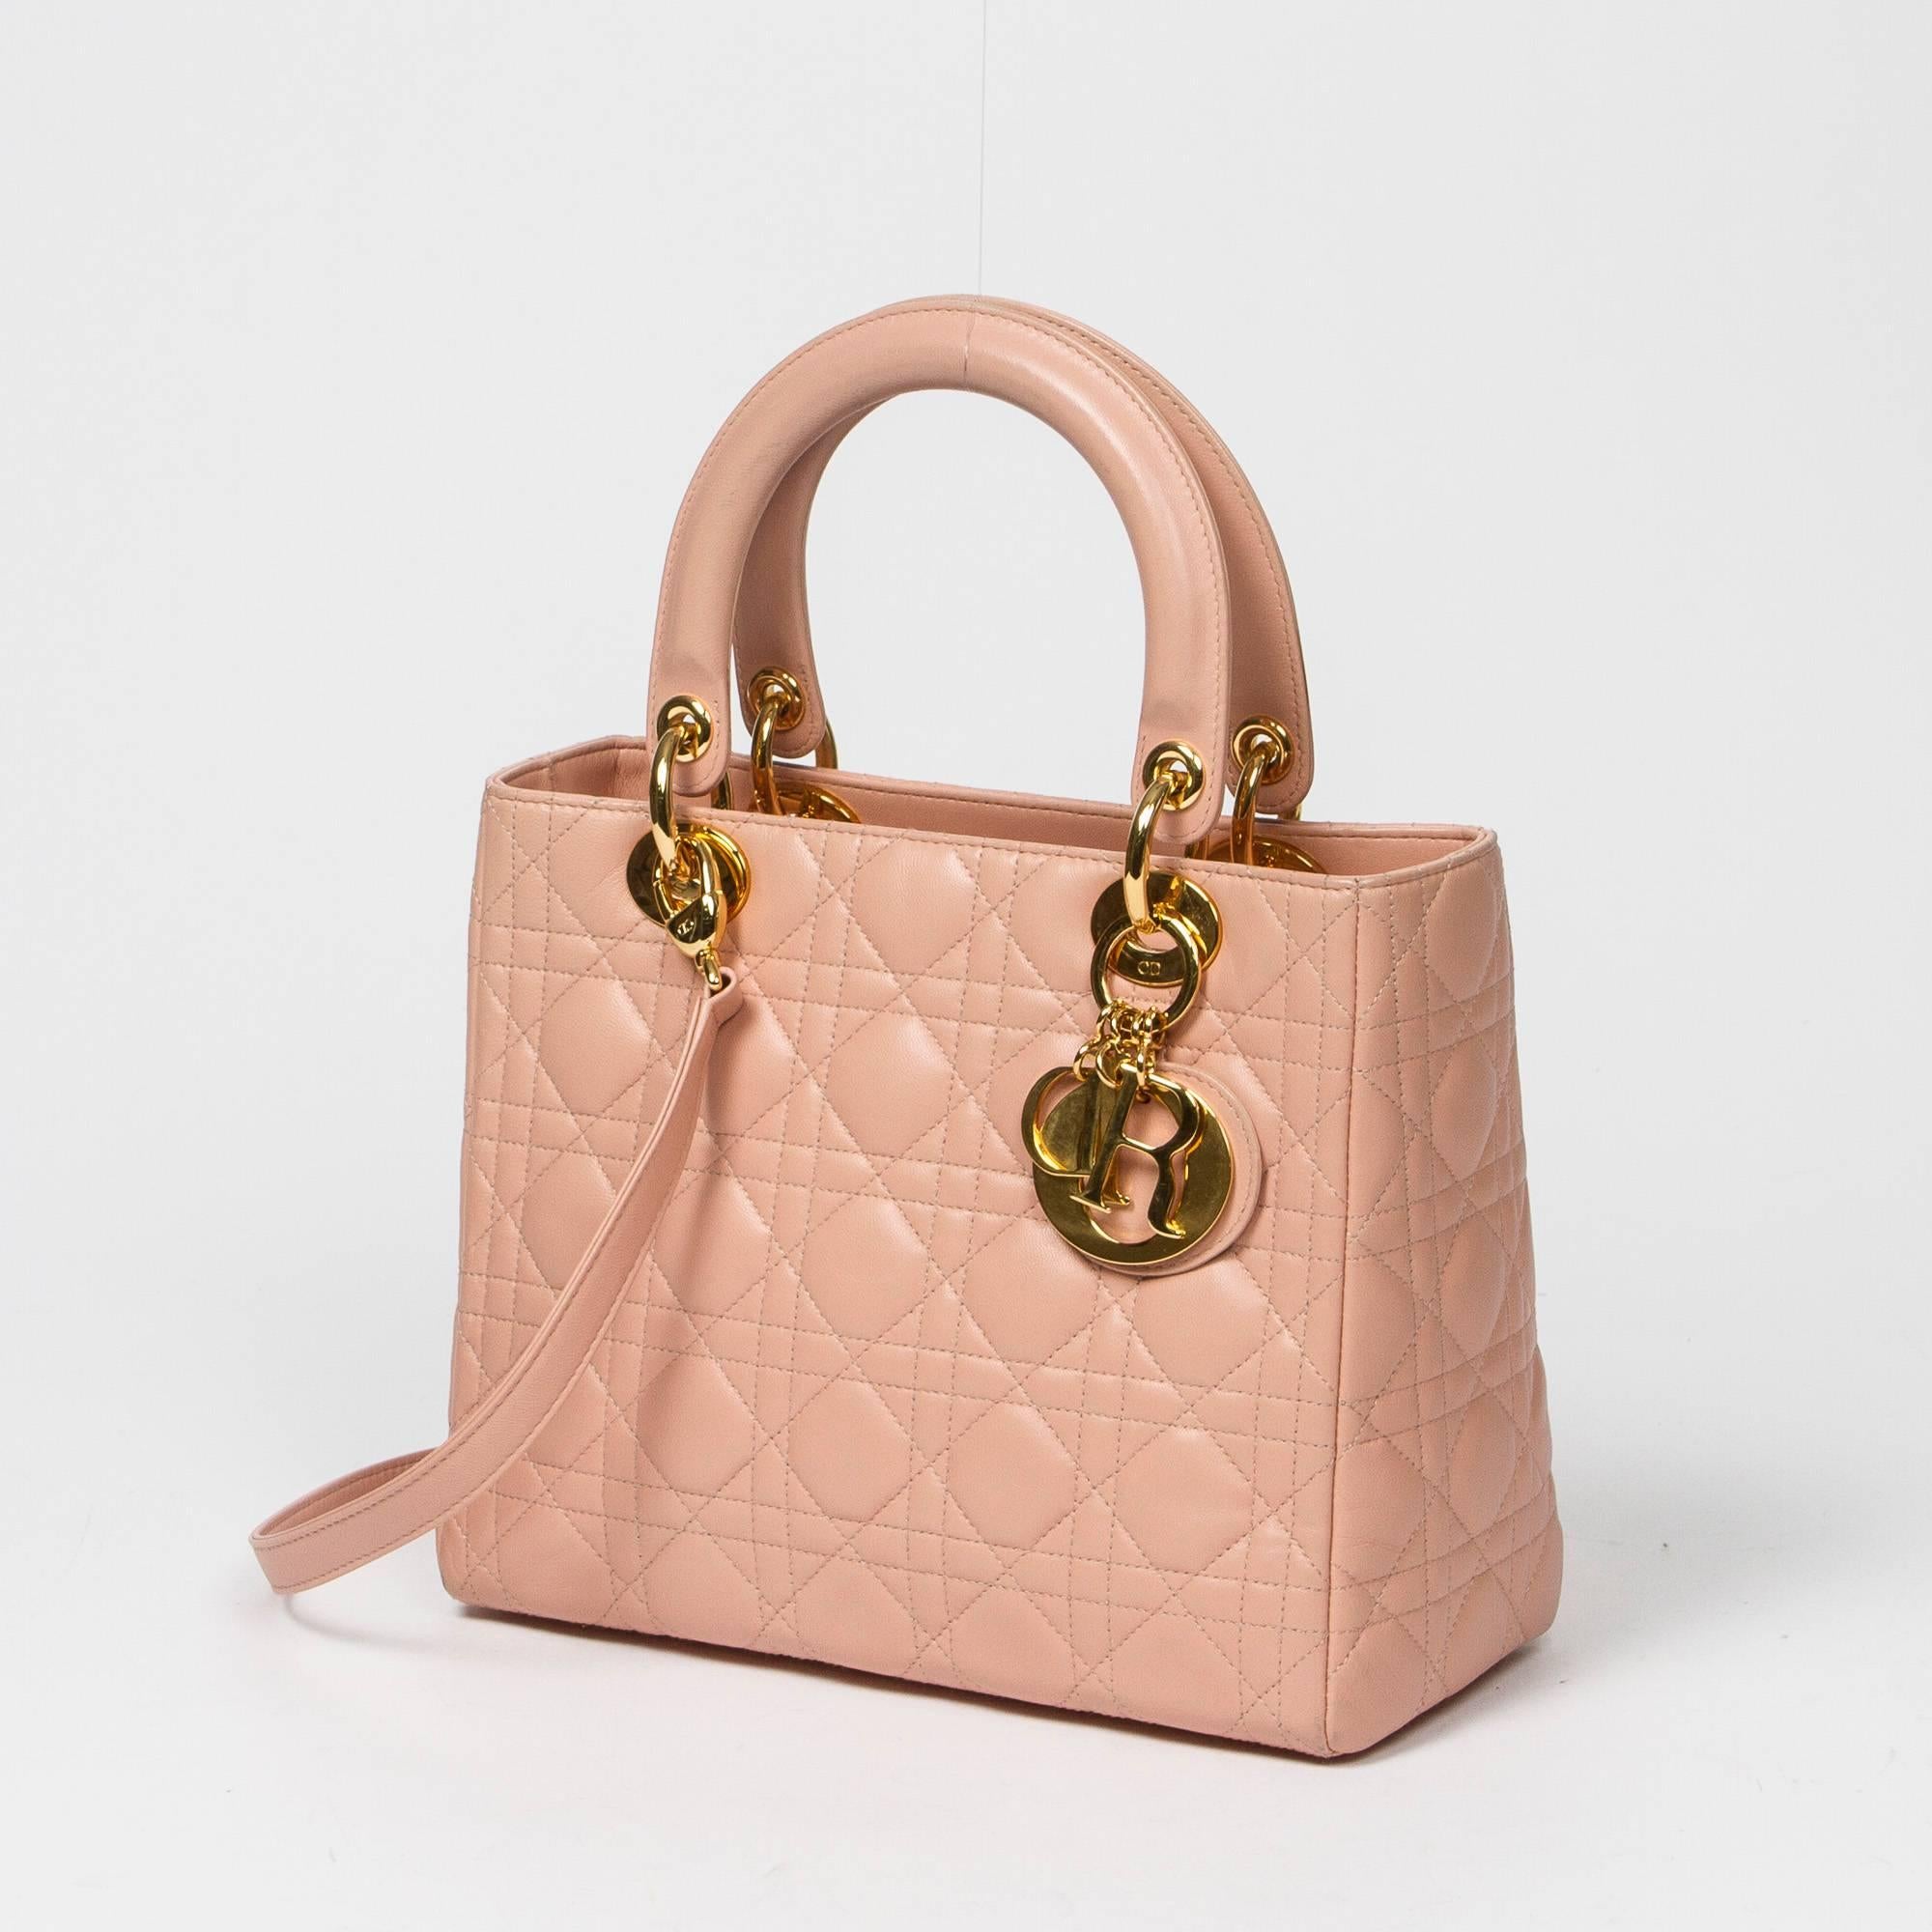 Lady Dior MM in soft pink cannage leather with optional shoulder strap, handles in soft pink leather. Gold hardware. Zip closure. 4 protective feet. Pink monogram fabric lined interior with one zip pocket. Shoulder strap, dustbag and box included.